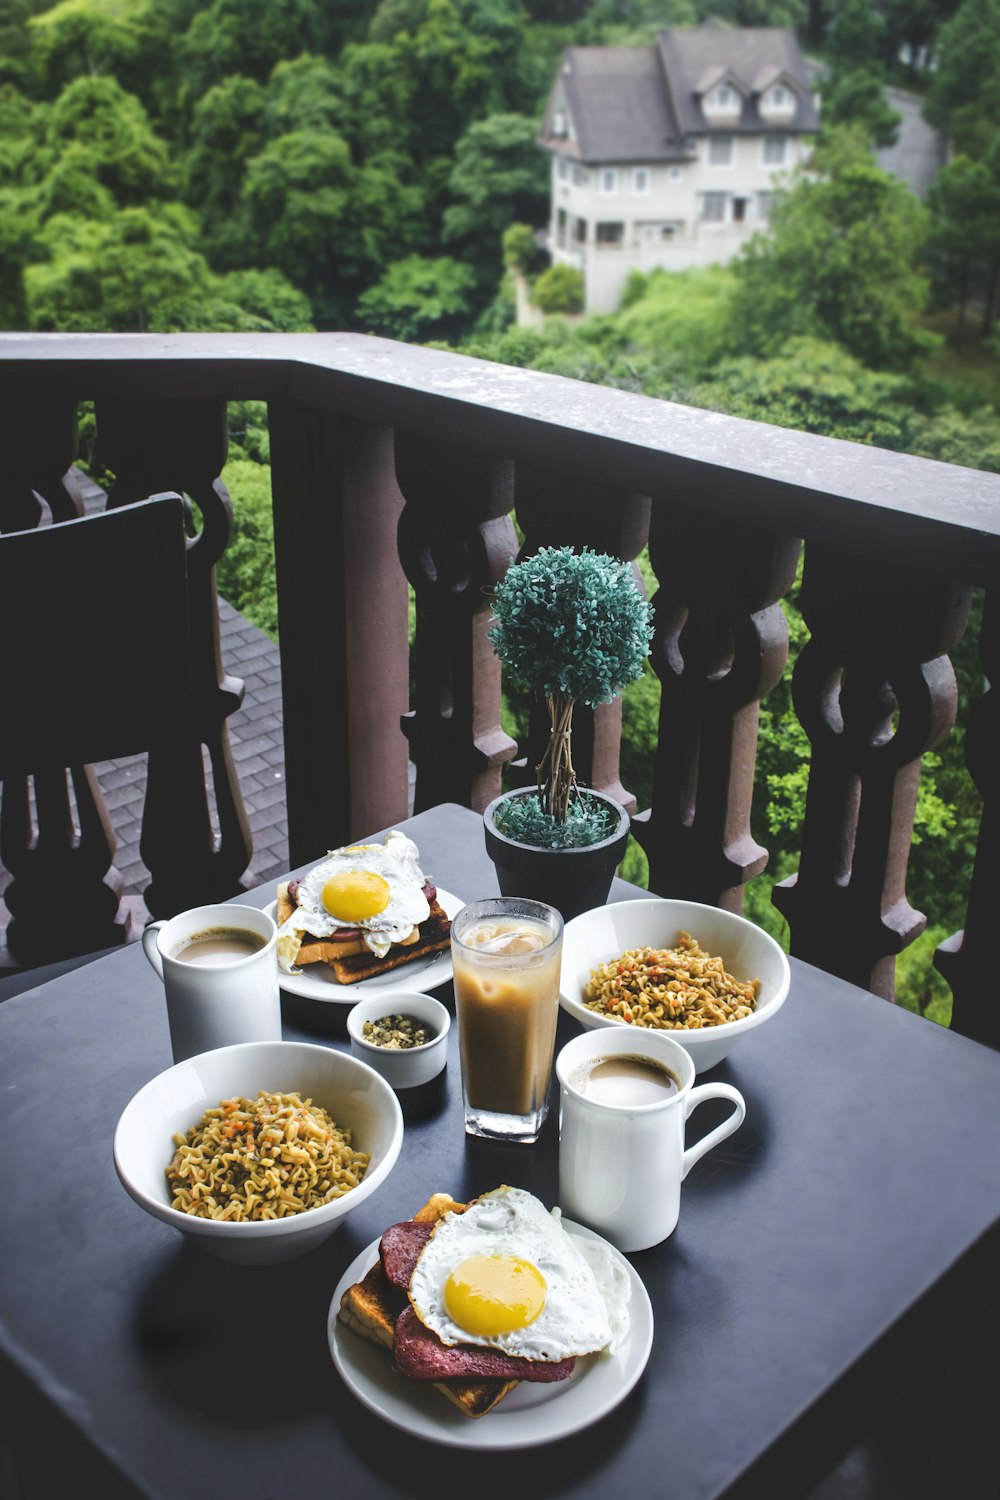 breakfast placed on table at terrace